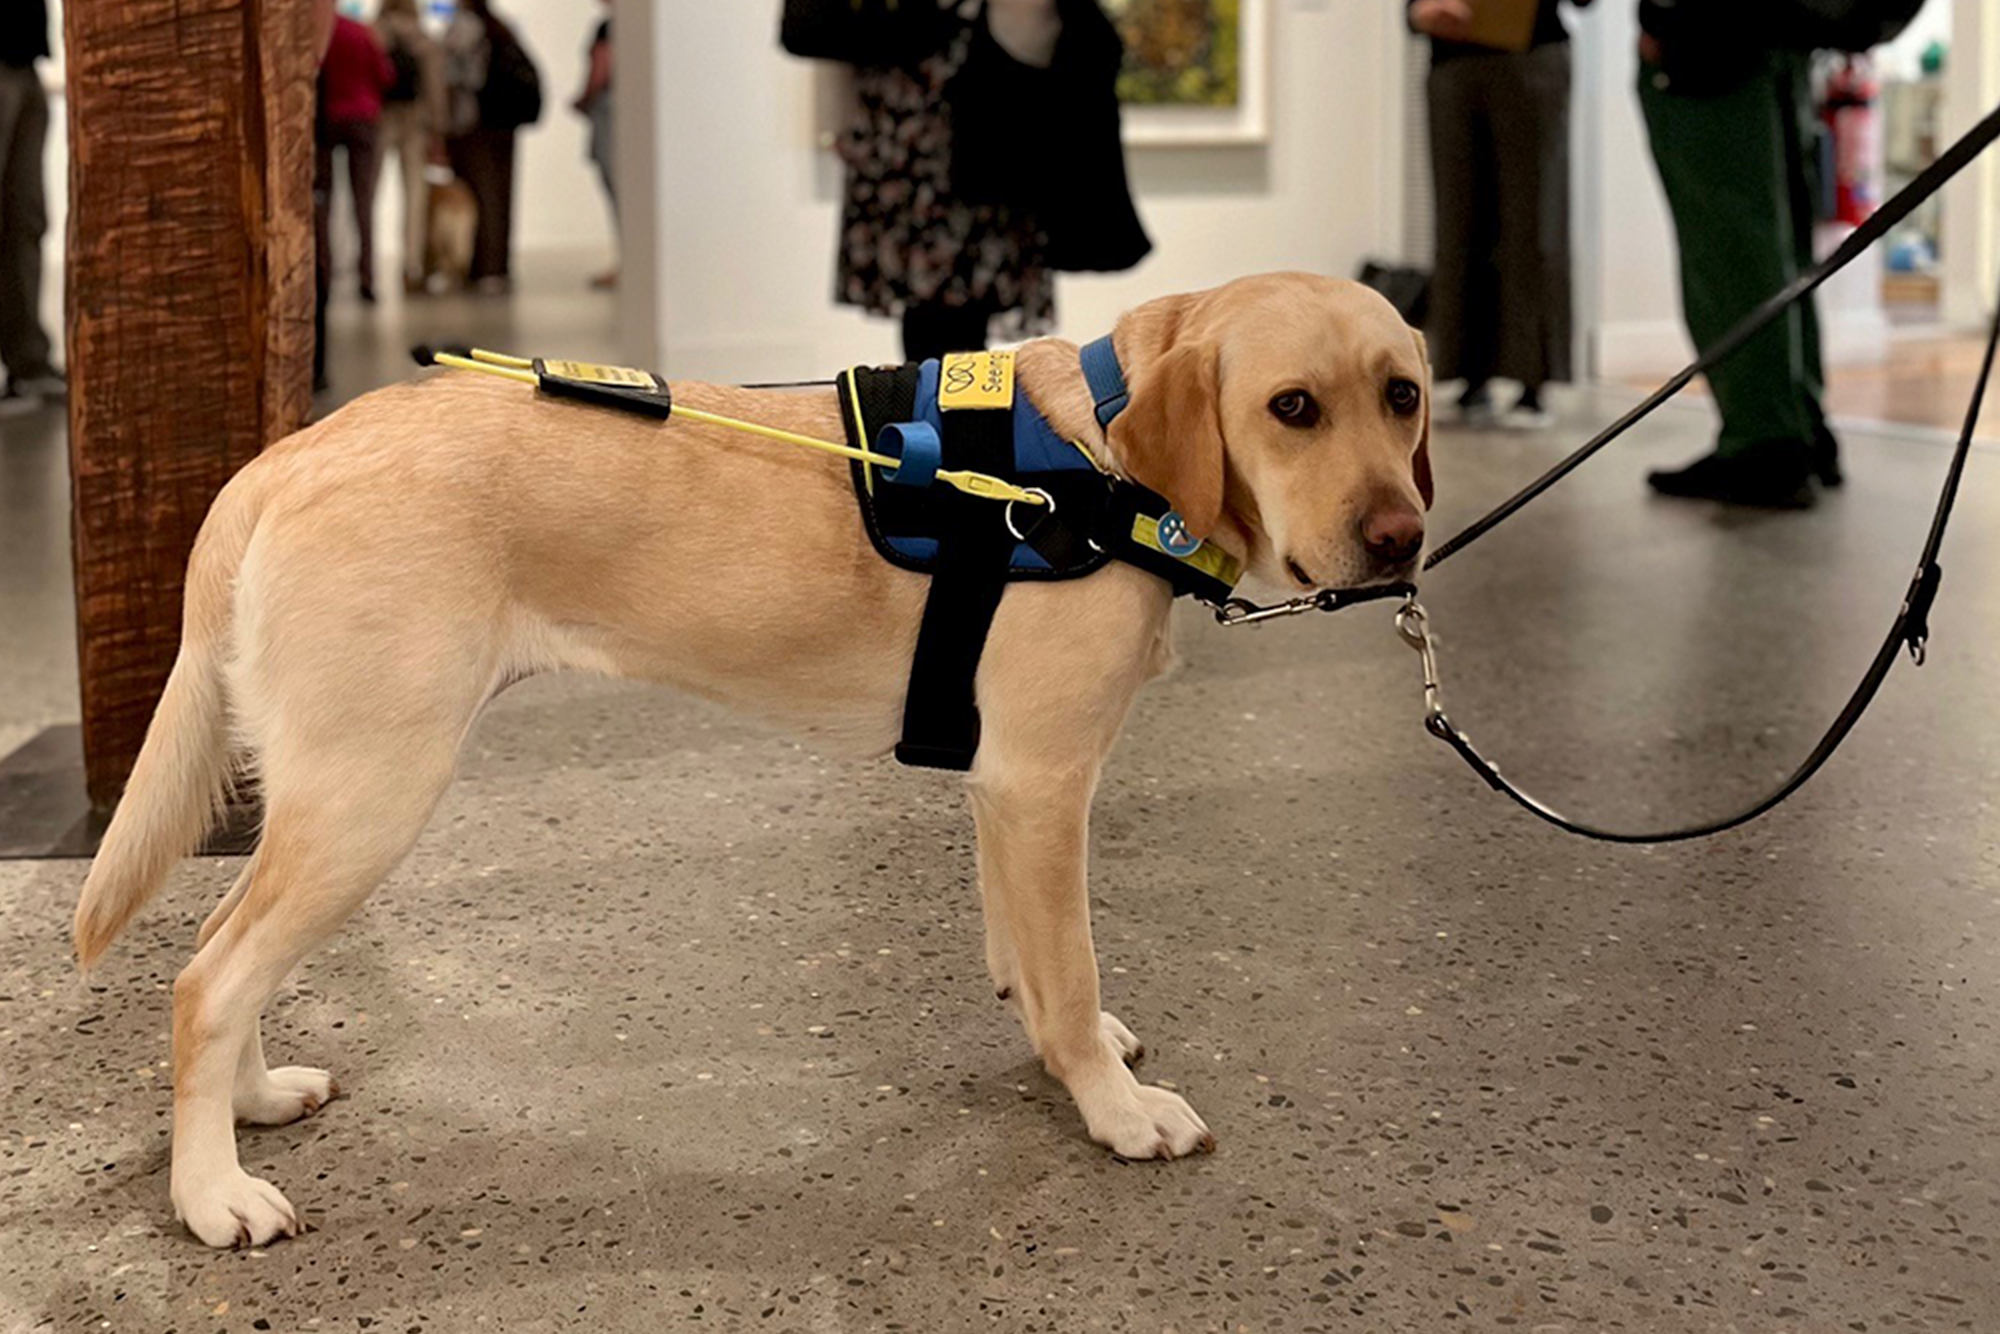 A golden coloured labrador dog wearing a blue and yellow Guide Dog harness standing in a gallery space, the legs of people are in the background.